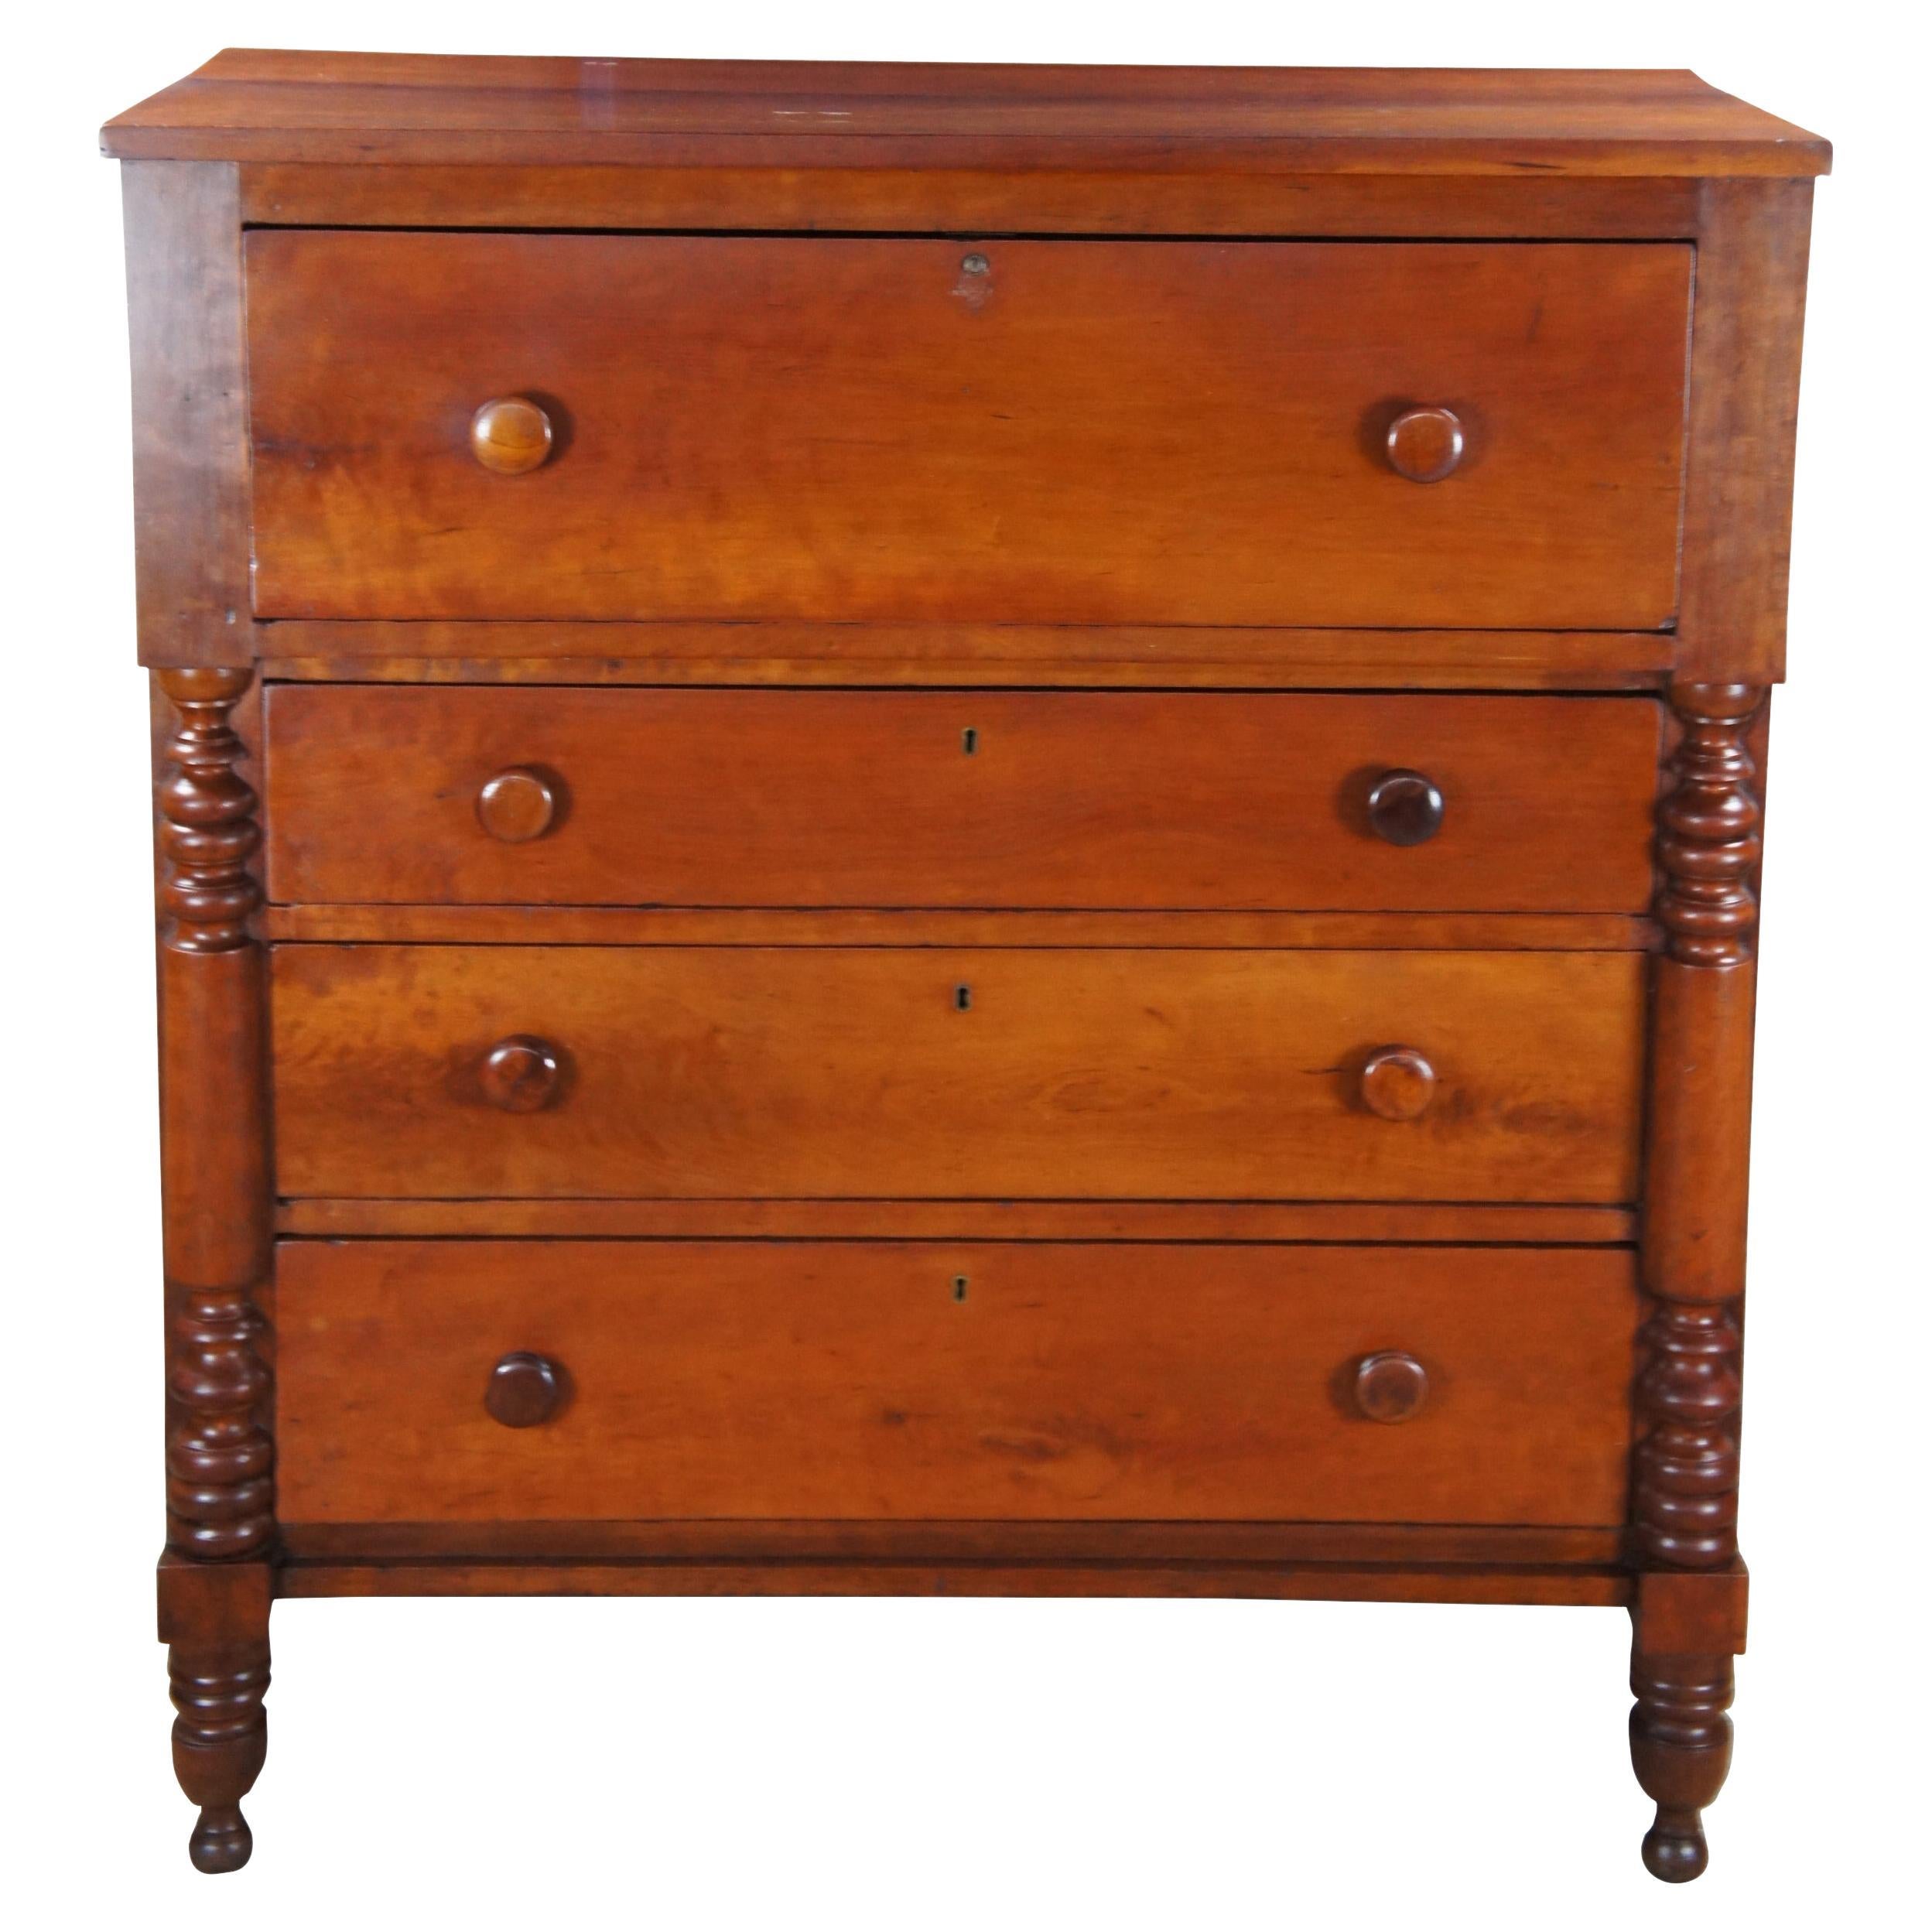 Antique 19th Century American Empire Cherry Tallboy Dresser Chest of Drawers